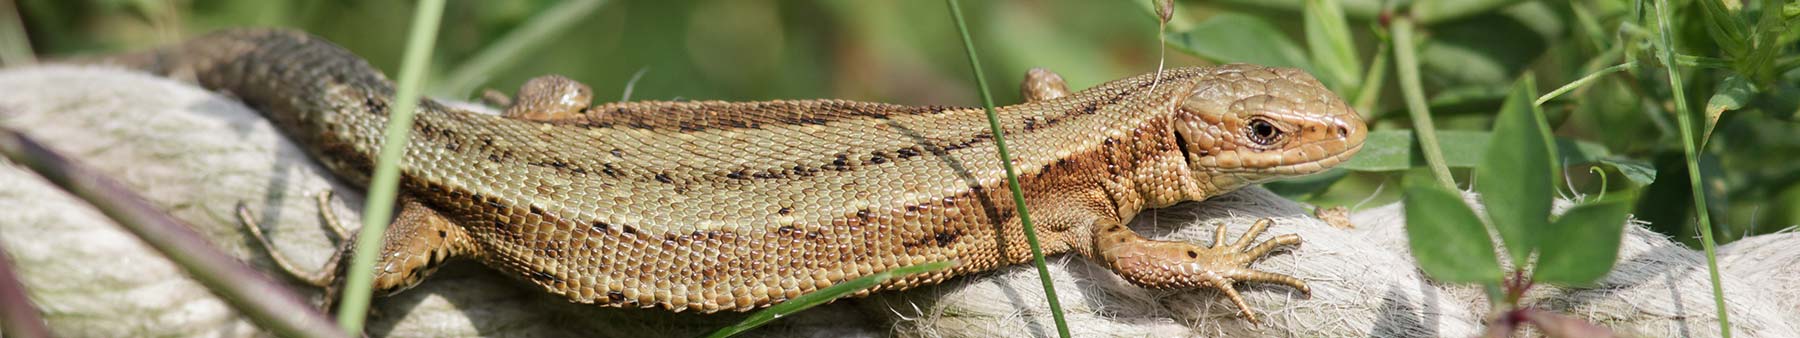 Reptile surveys and ecology